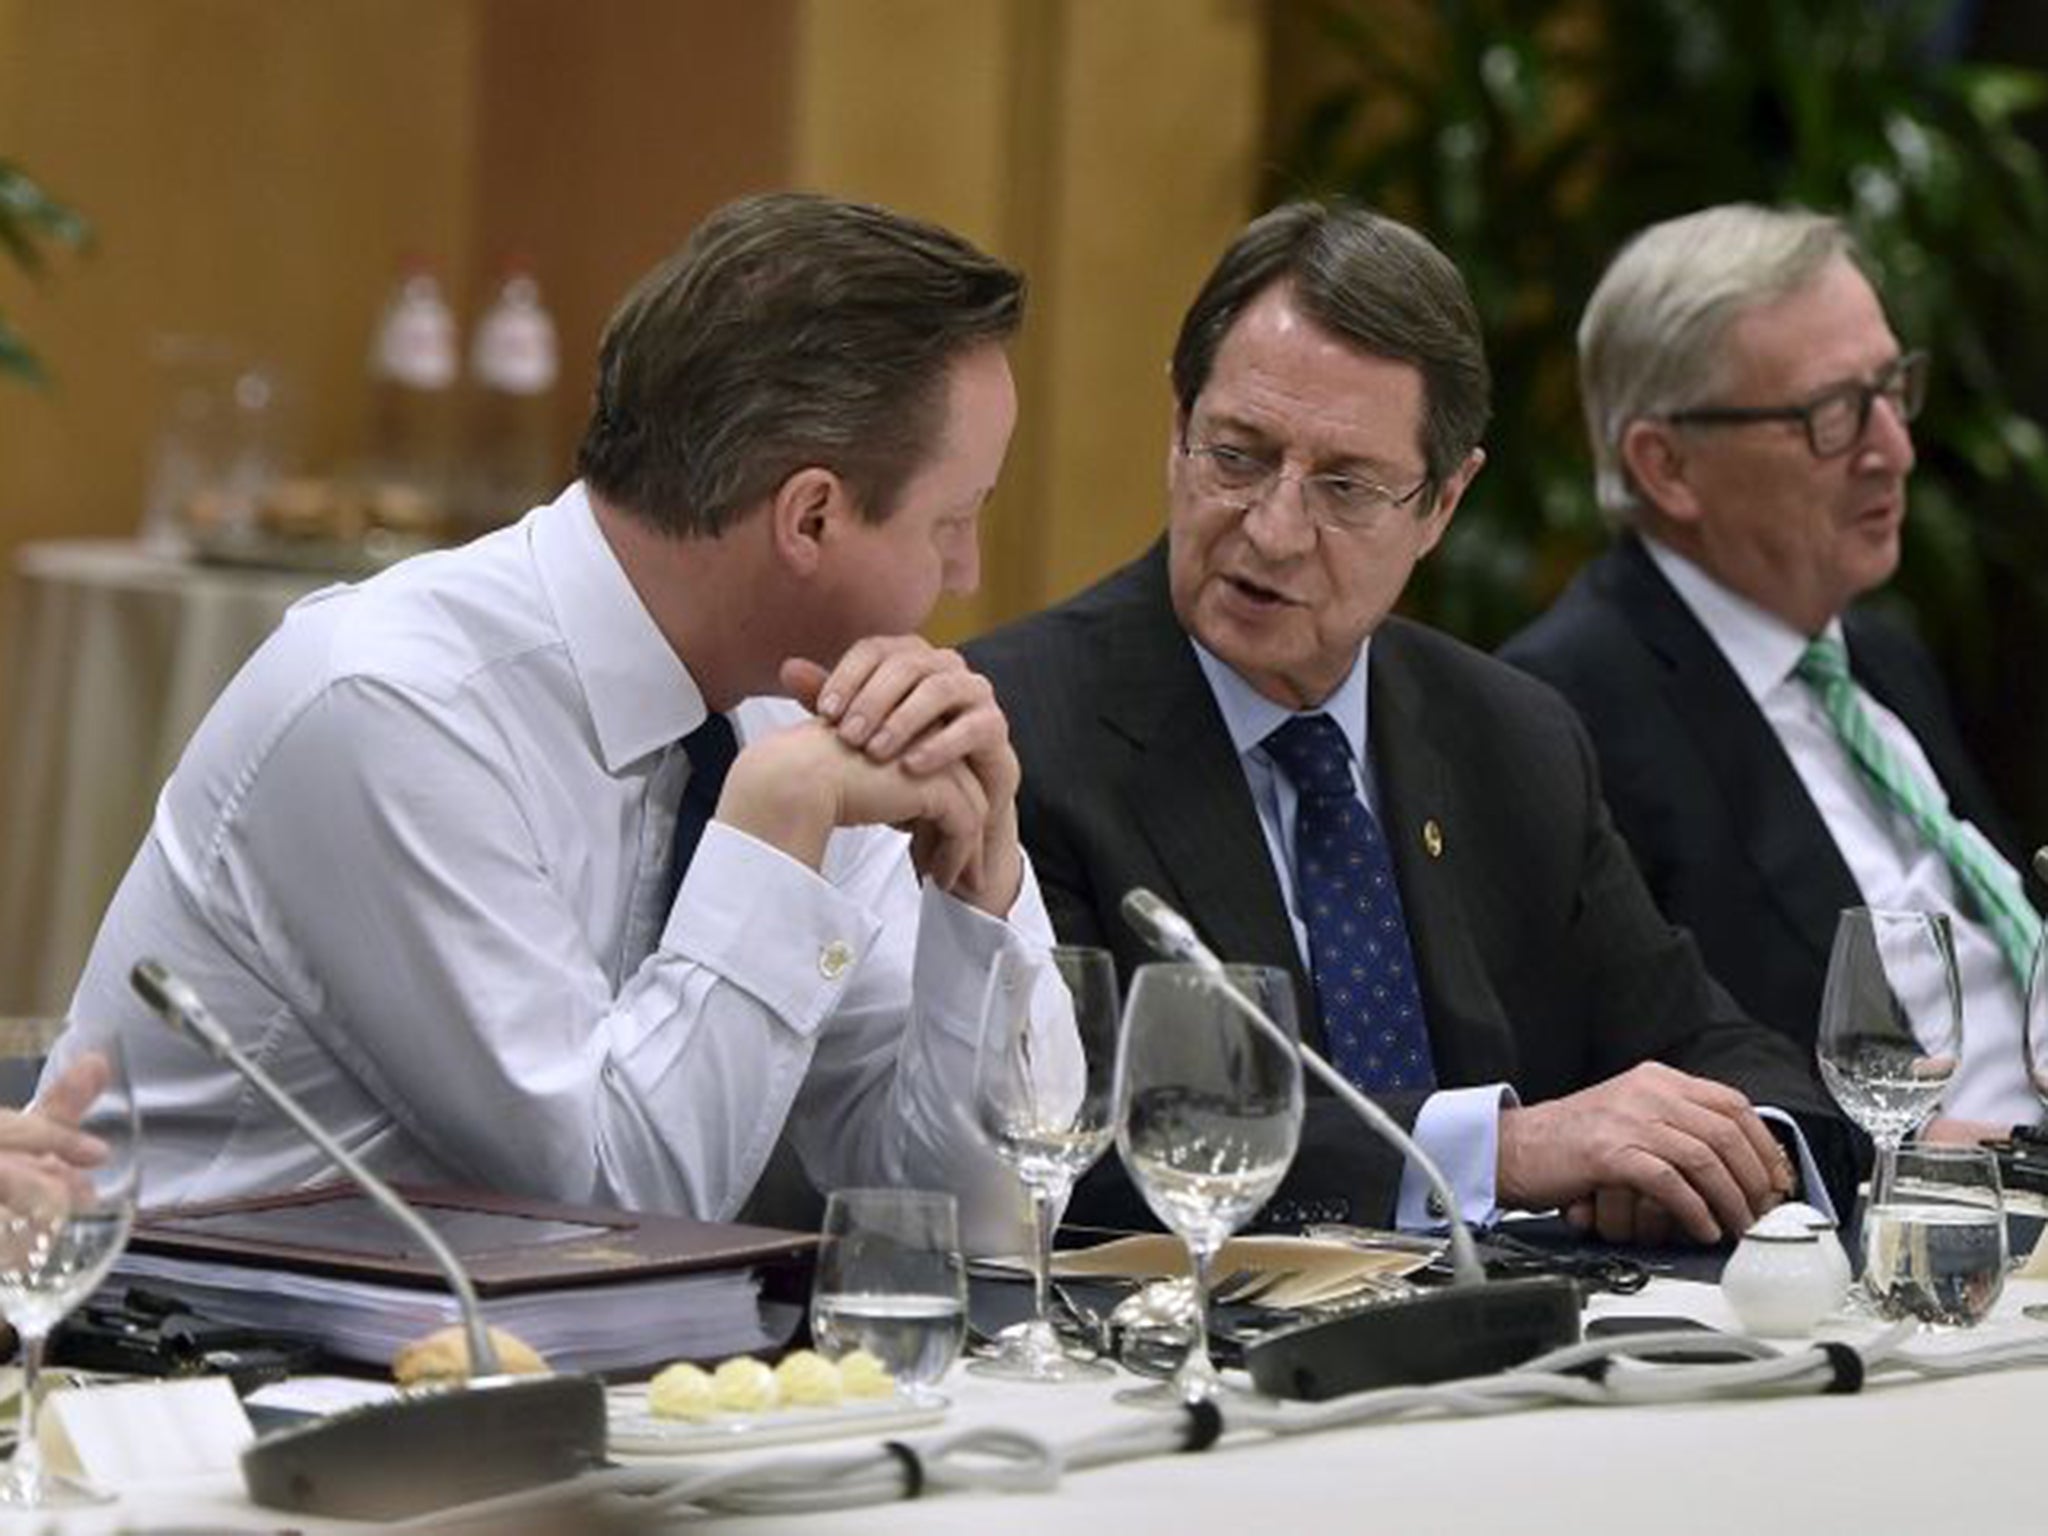 David Cameron in talks at the Brussels summit